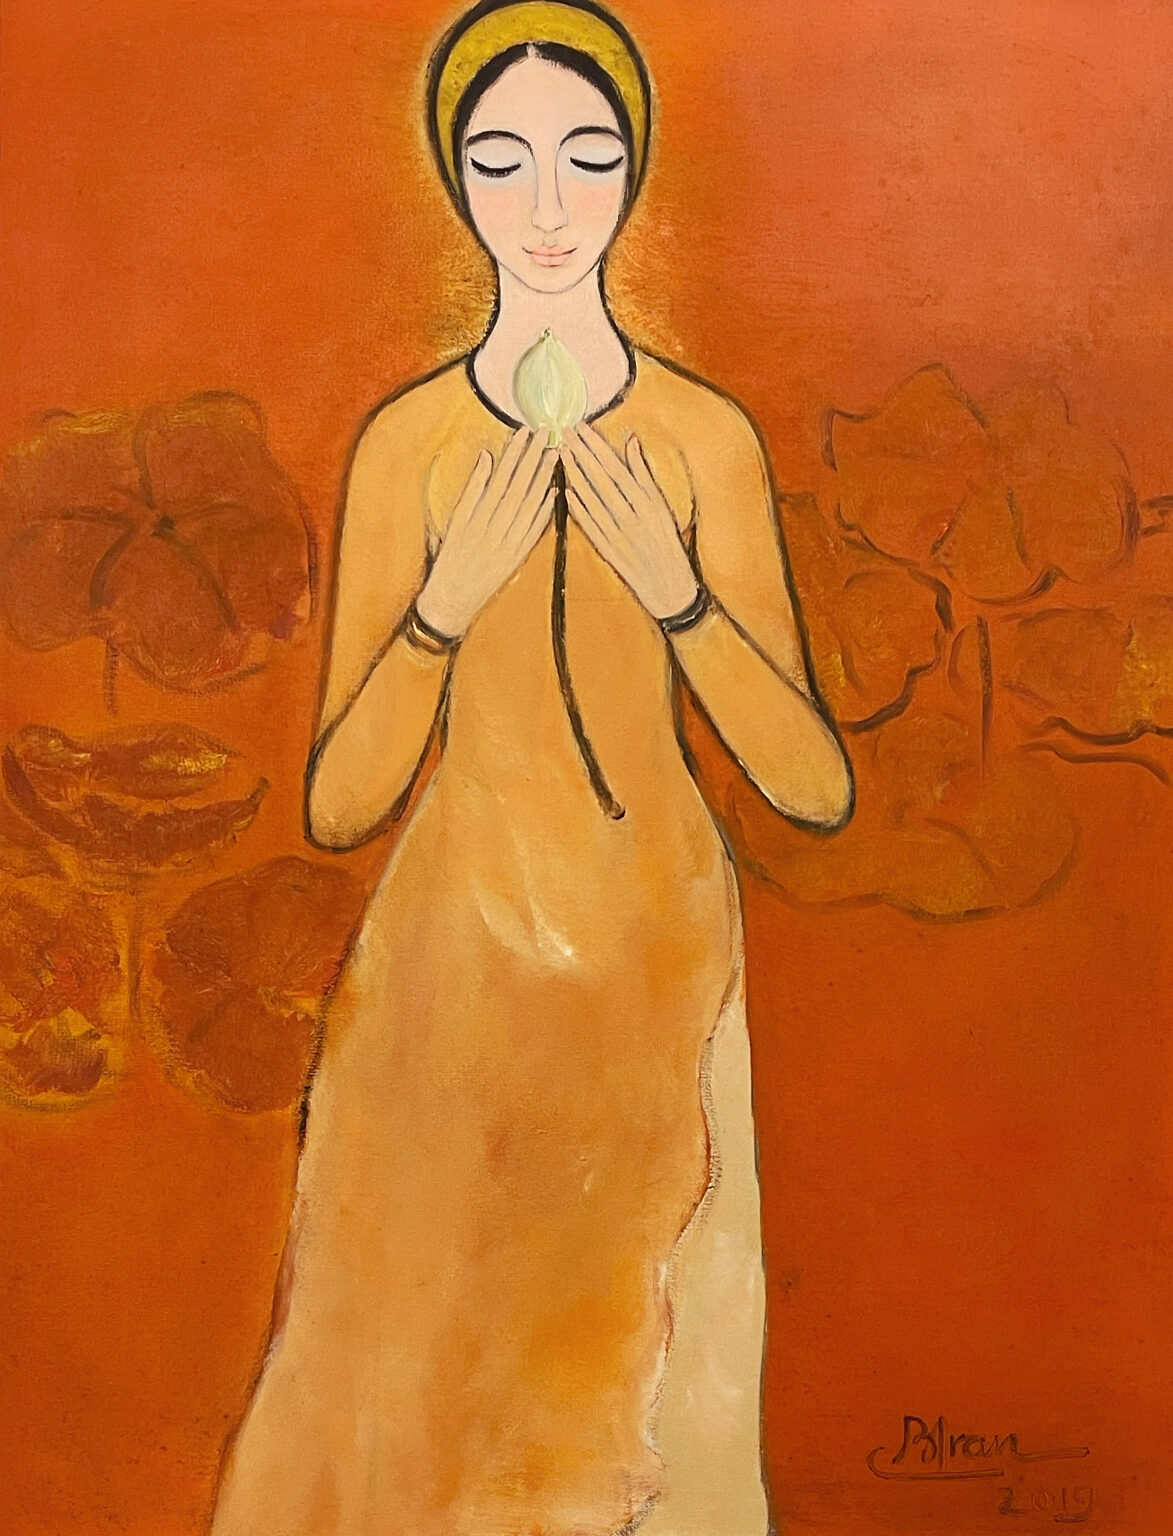 Lady Holding a Lotus Flower | oil on canvas | 130 x 100 cm. (51 3/16 x 39 3/8 in.)